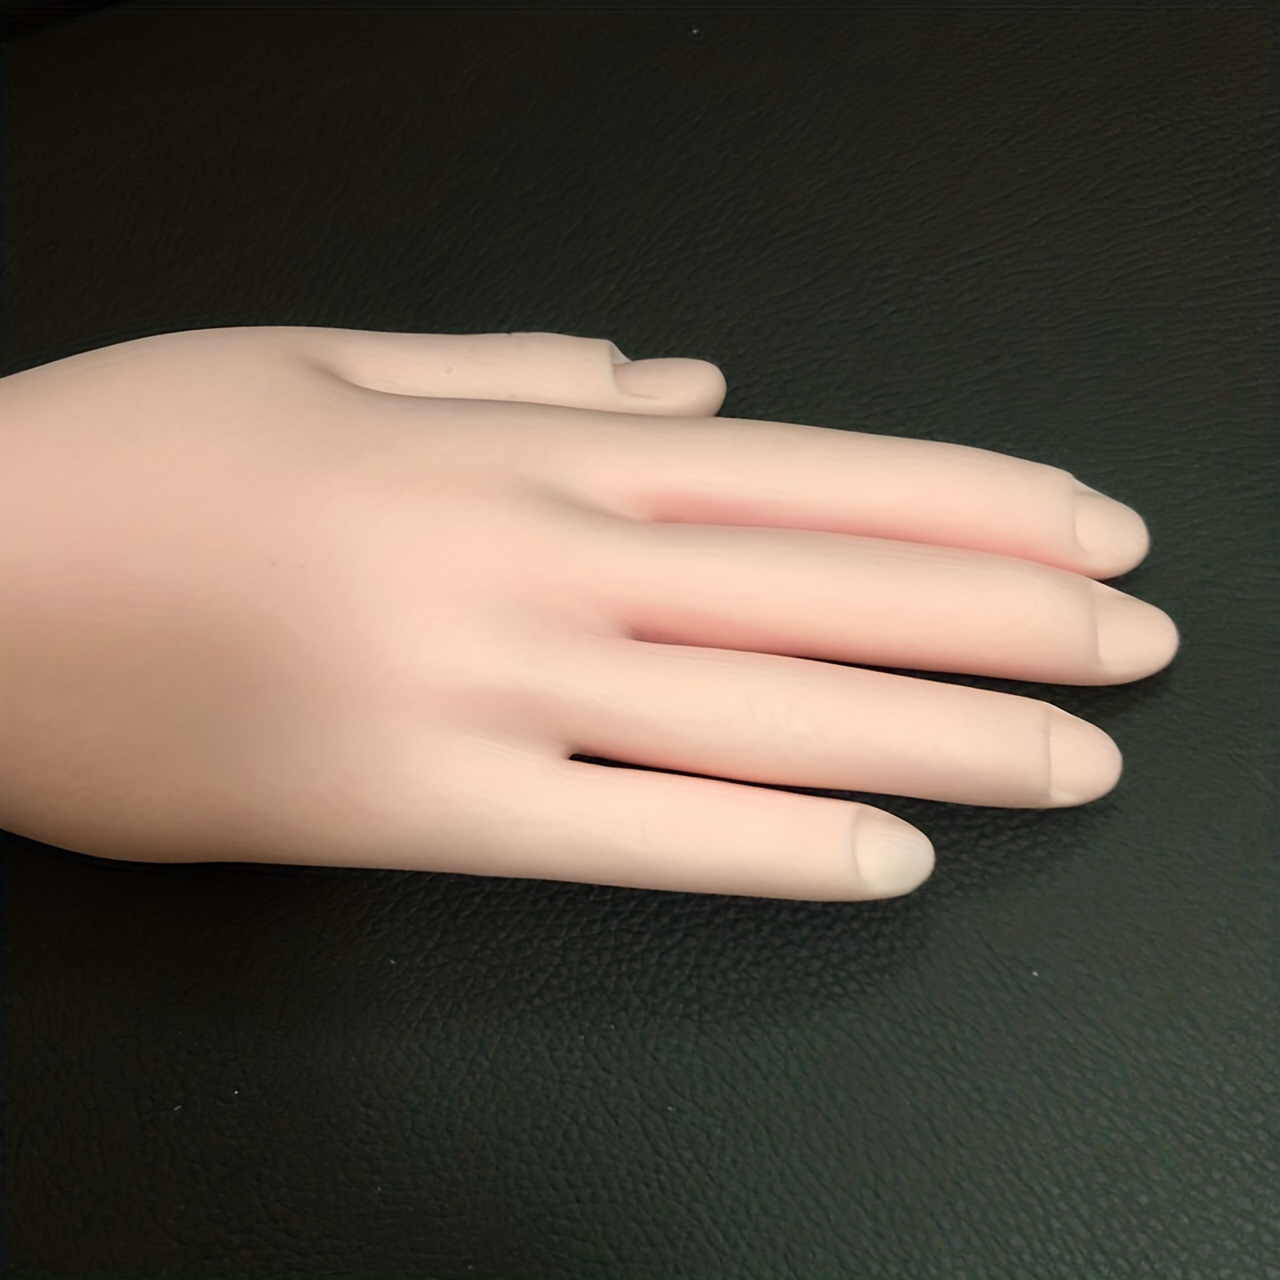 Silicone Practice Hand for Acrylic Nails - Female Nail Trainning